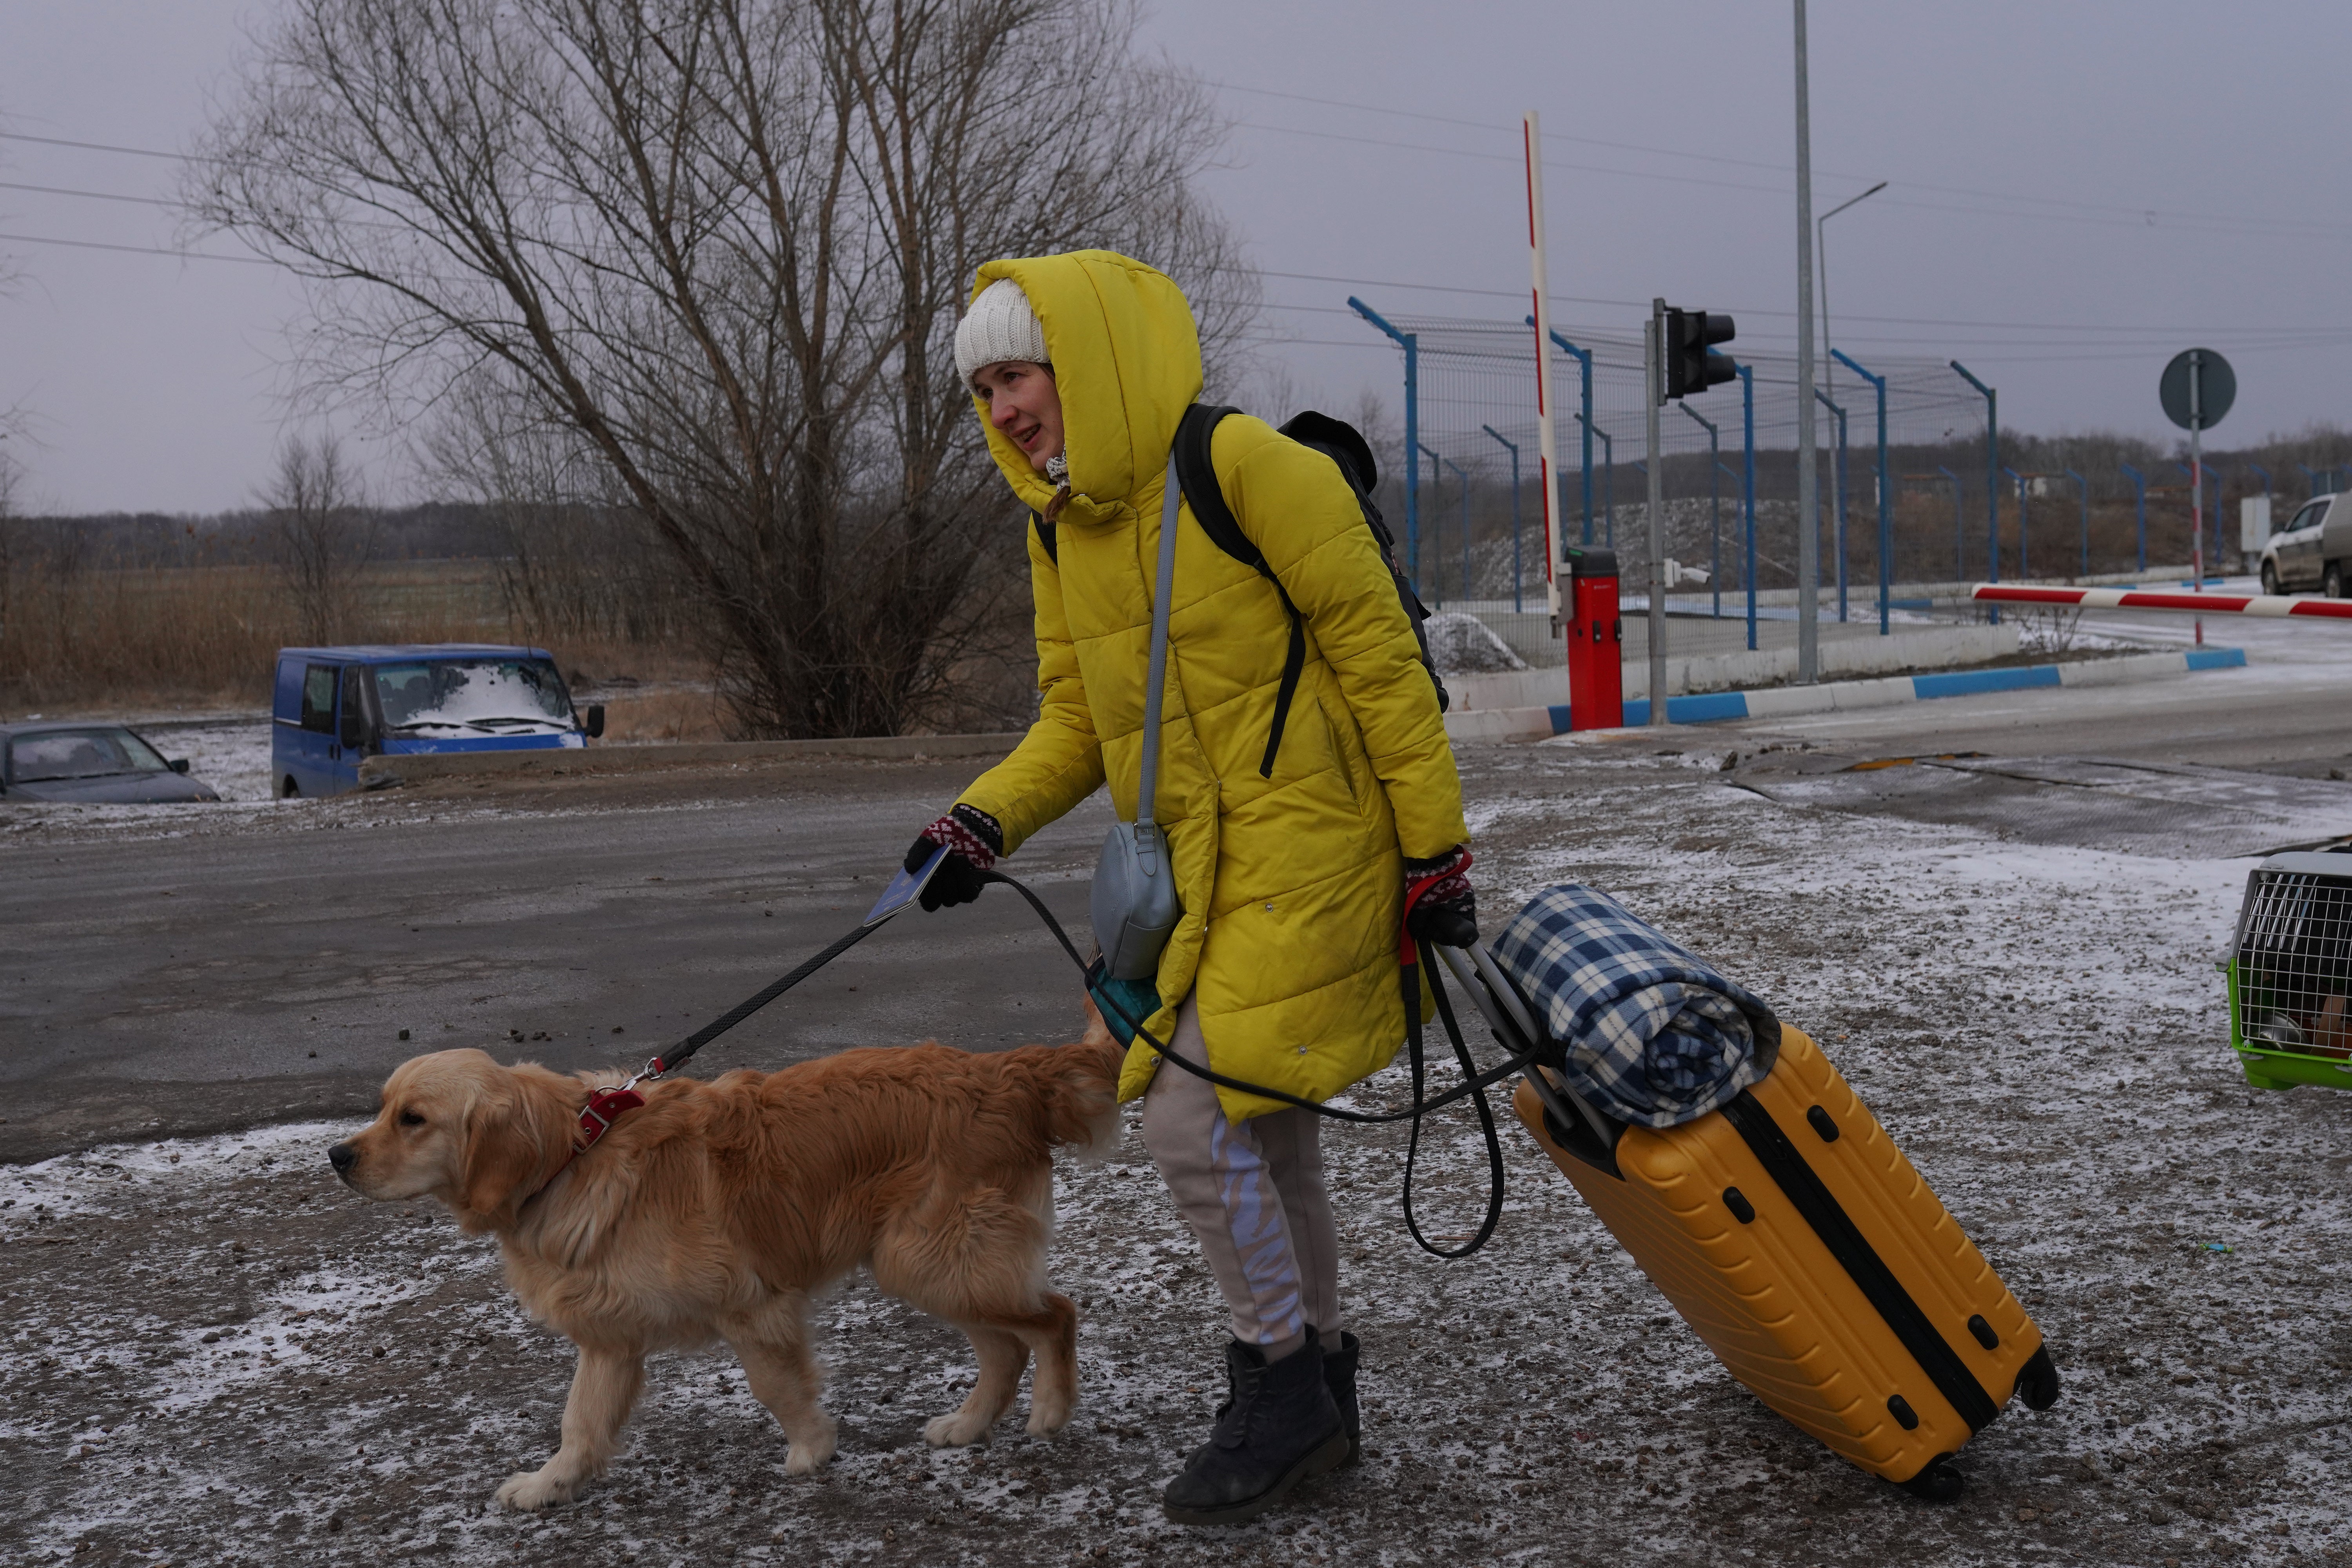 A woman fleeing the conflict in Ukraine crosses the border into Moldova